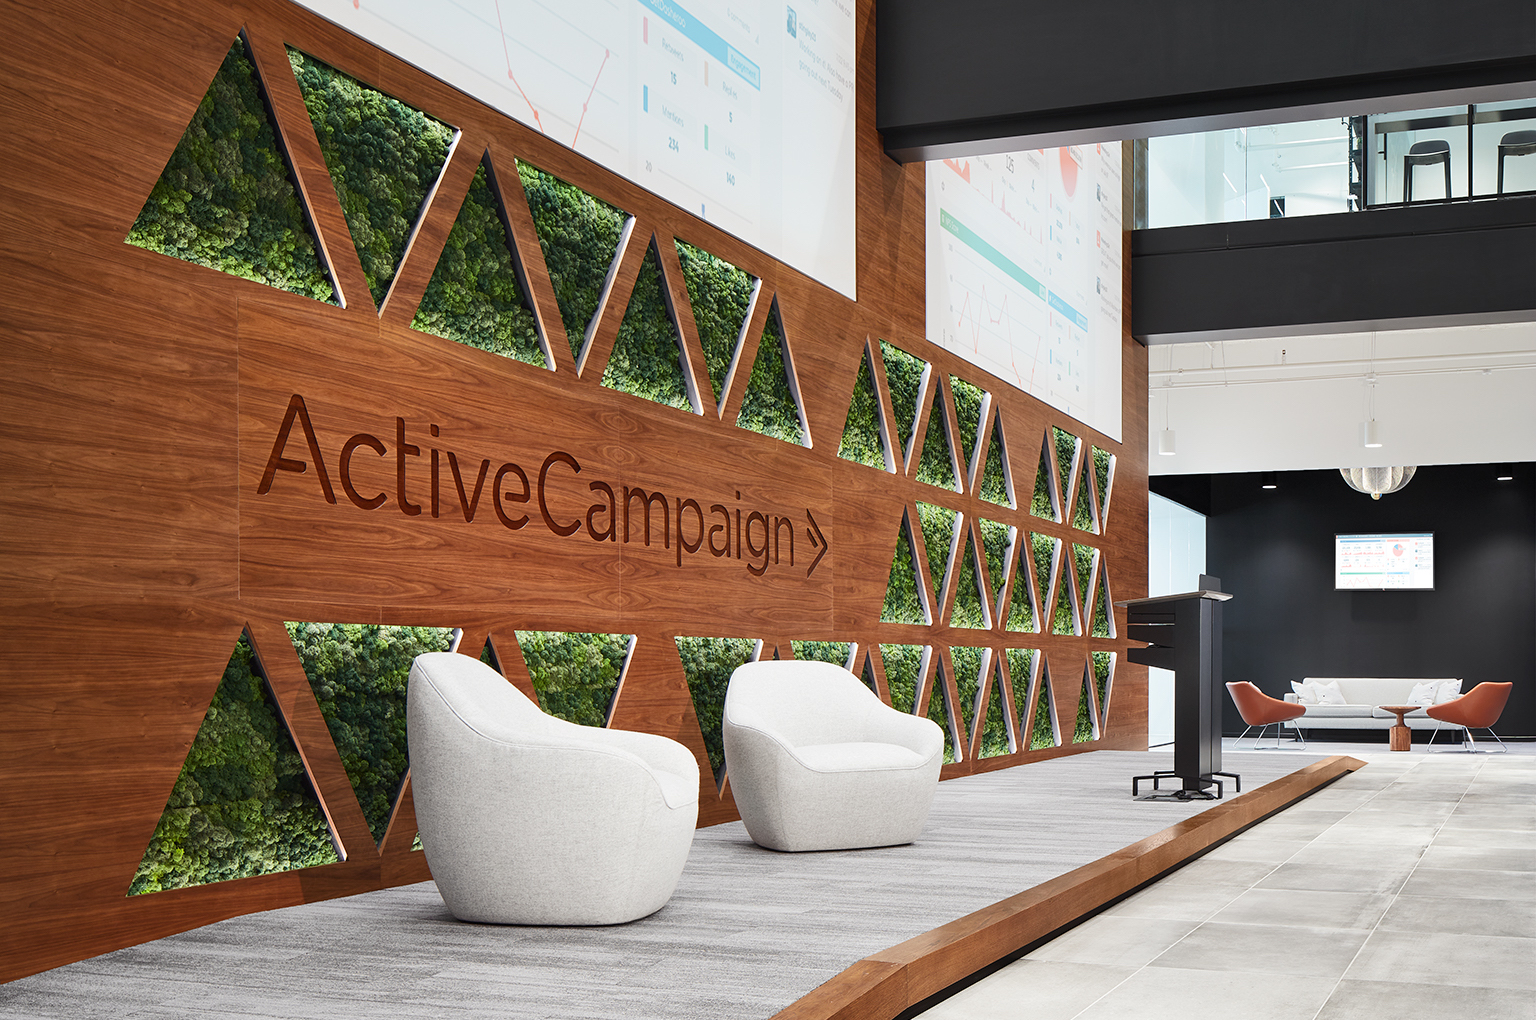 ActiveCampaign office lobby